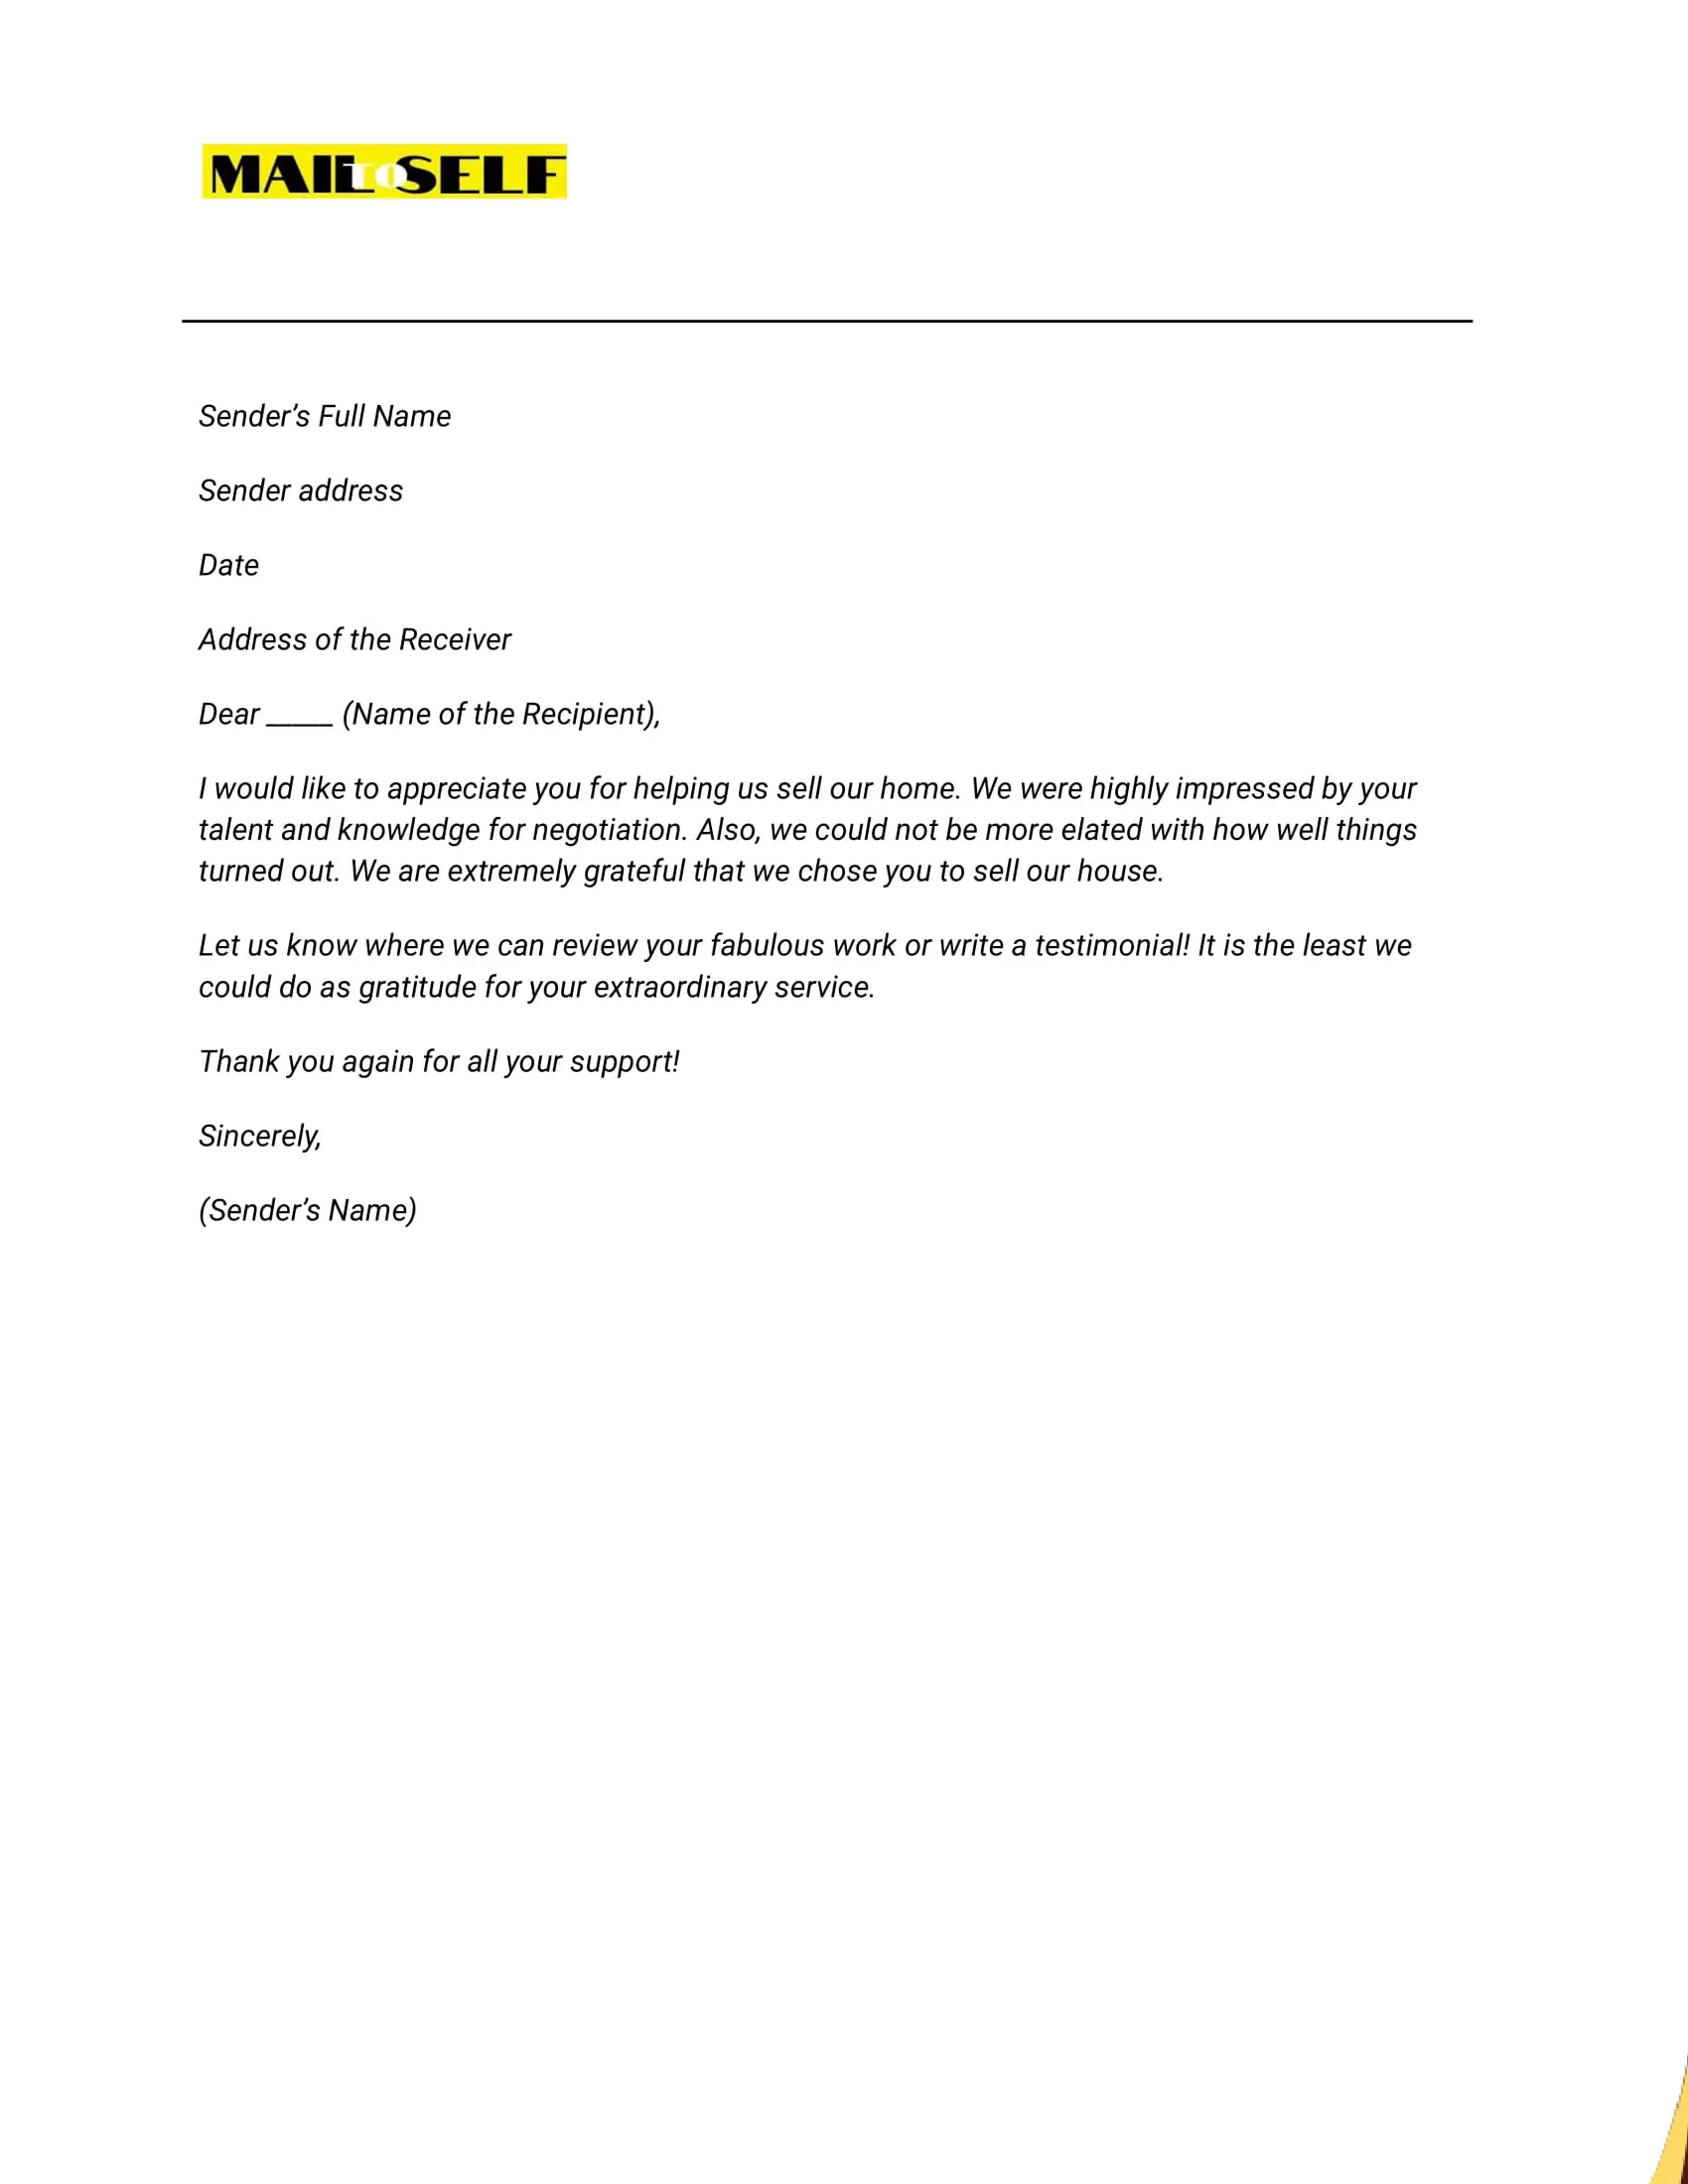 Sample #1 Thank You Letter to Real Estate Agent